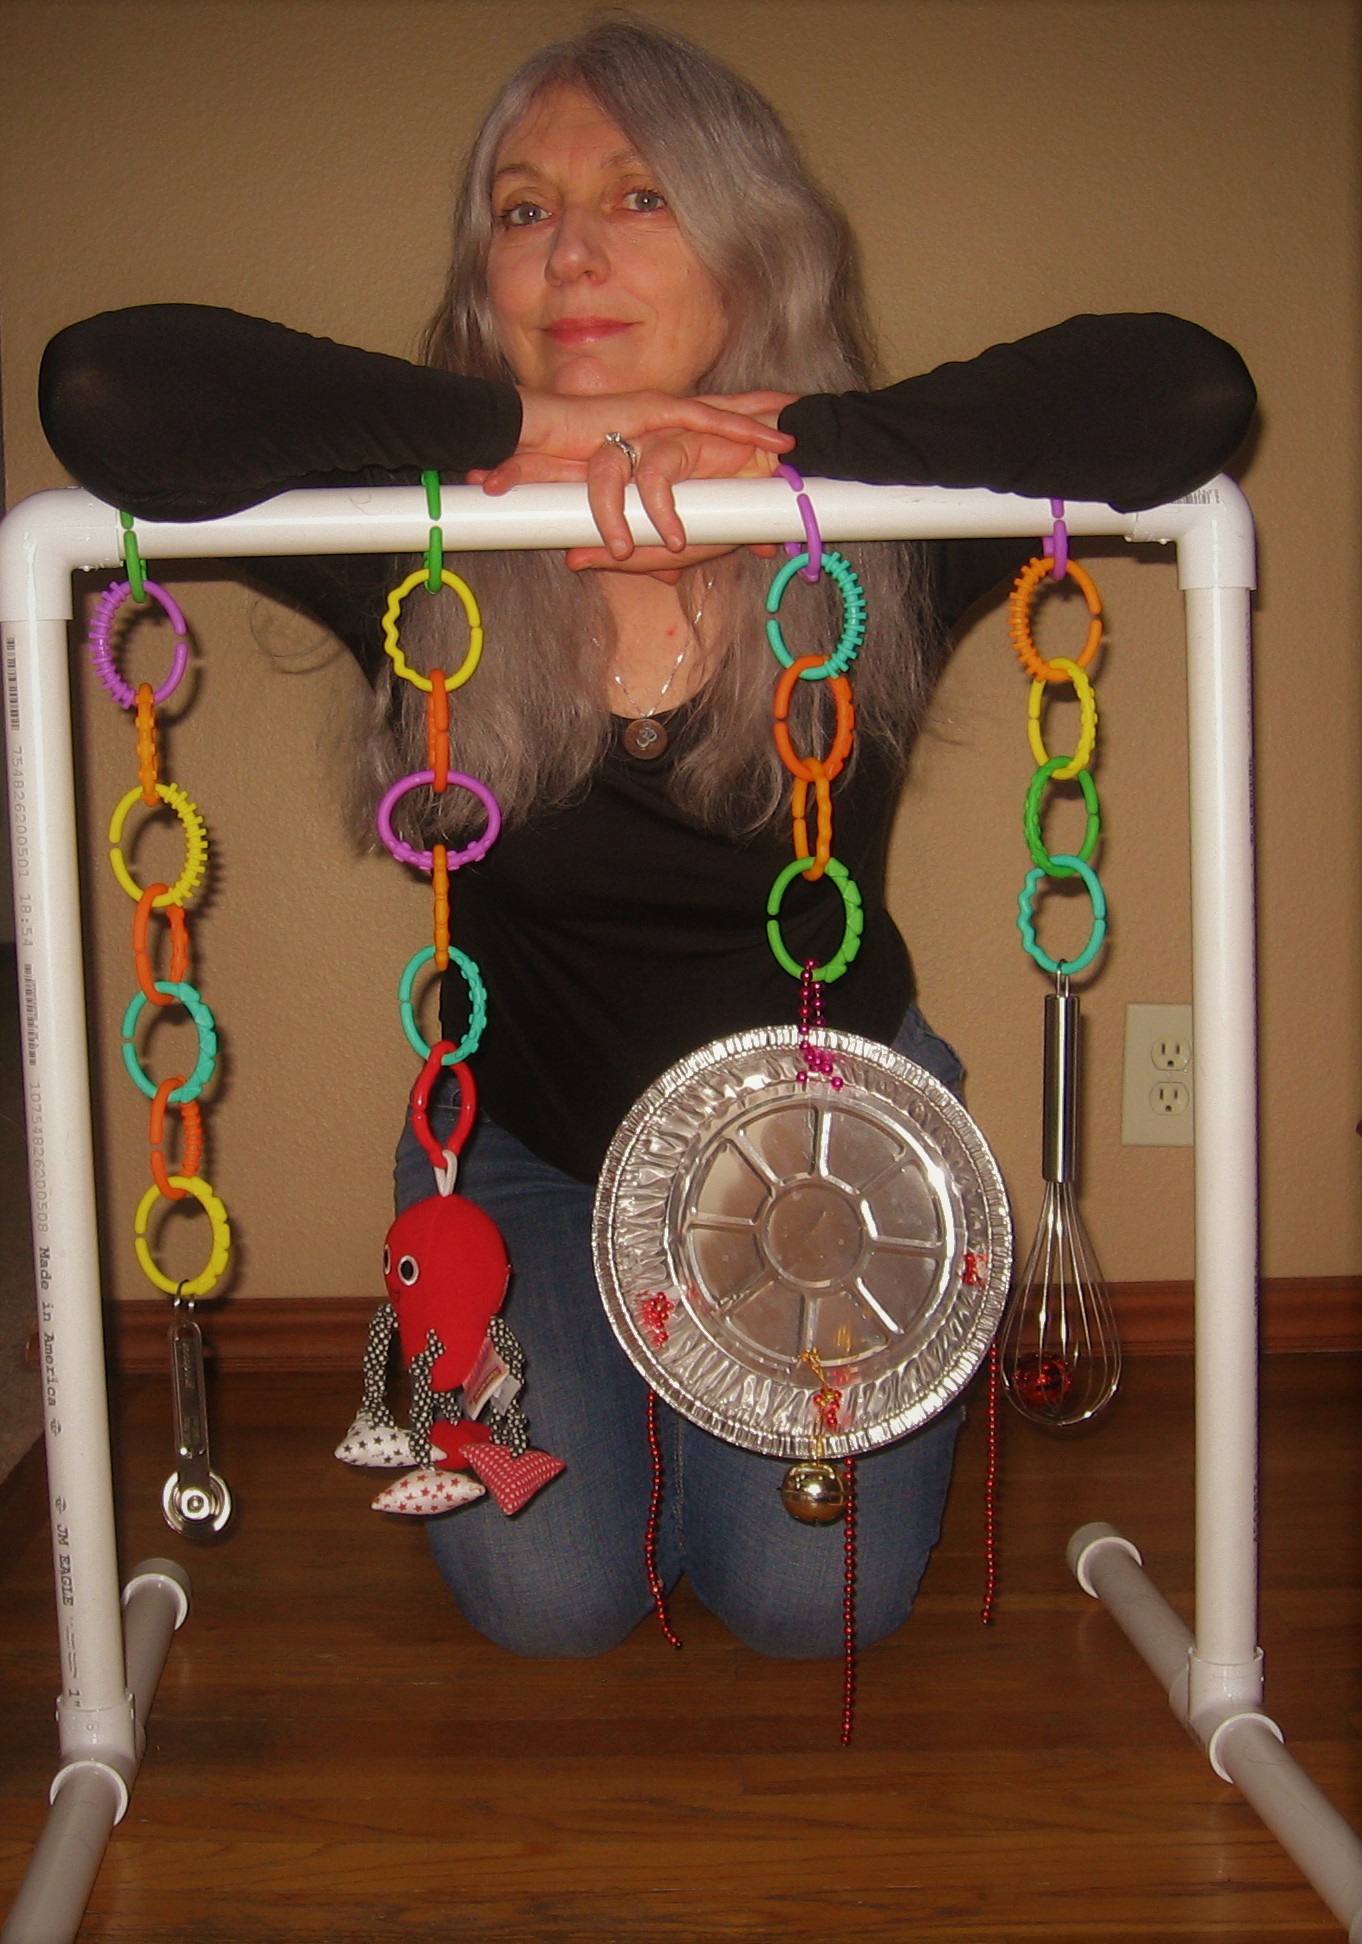 A woman is kneeling on a wood floor behind a homemade pvc pipe frame. She is leaning forward with her arms resting on the top of the frame. Hanging from it are four colored plastic chains. At the end of each chain is an object—a measuring spoon, a stuffed